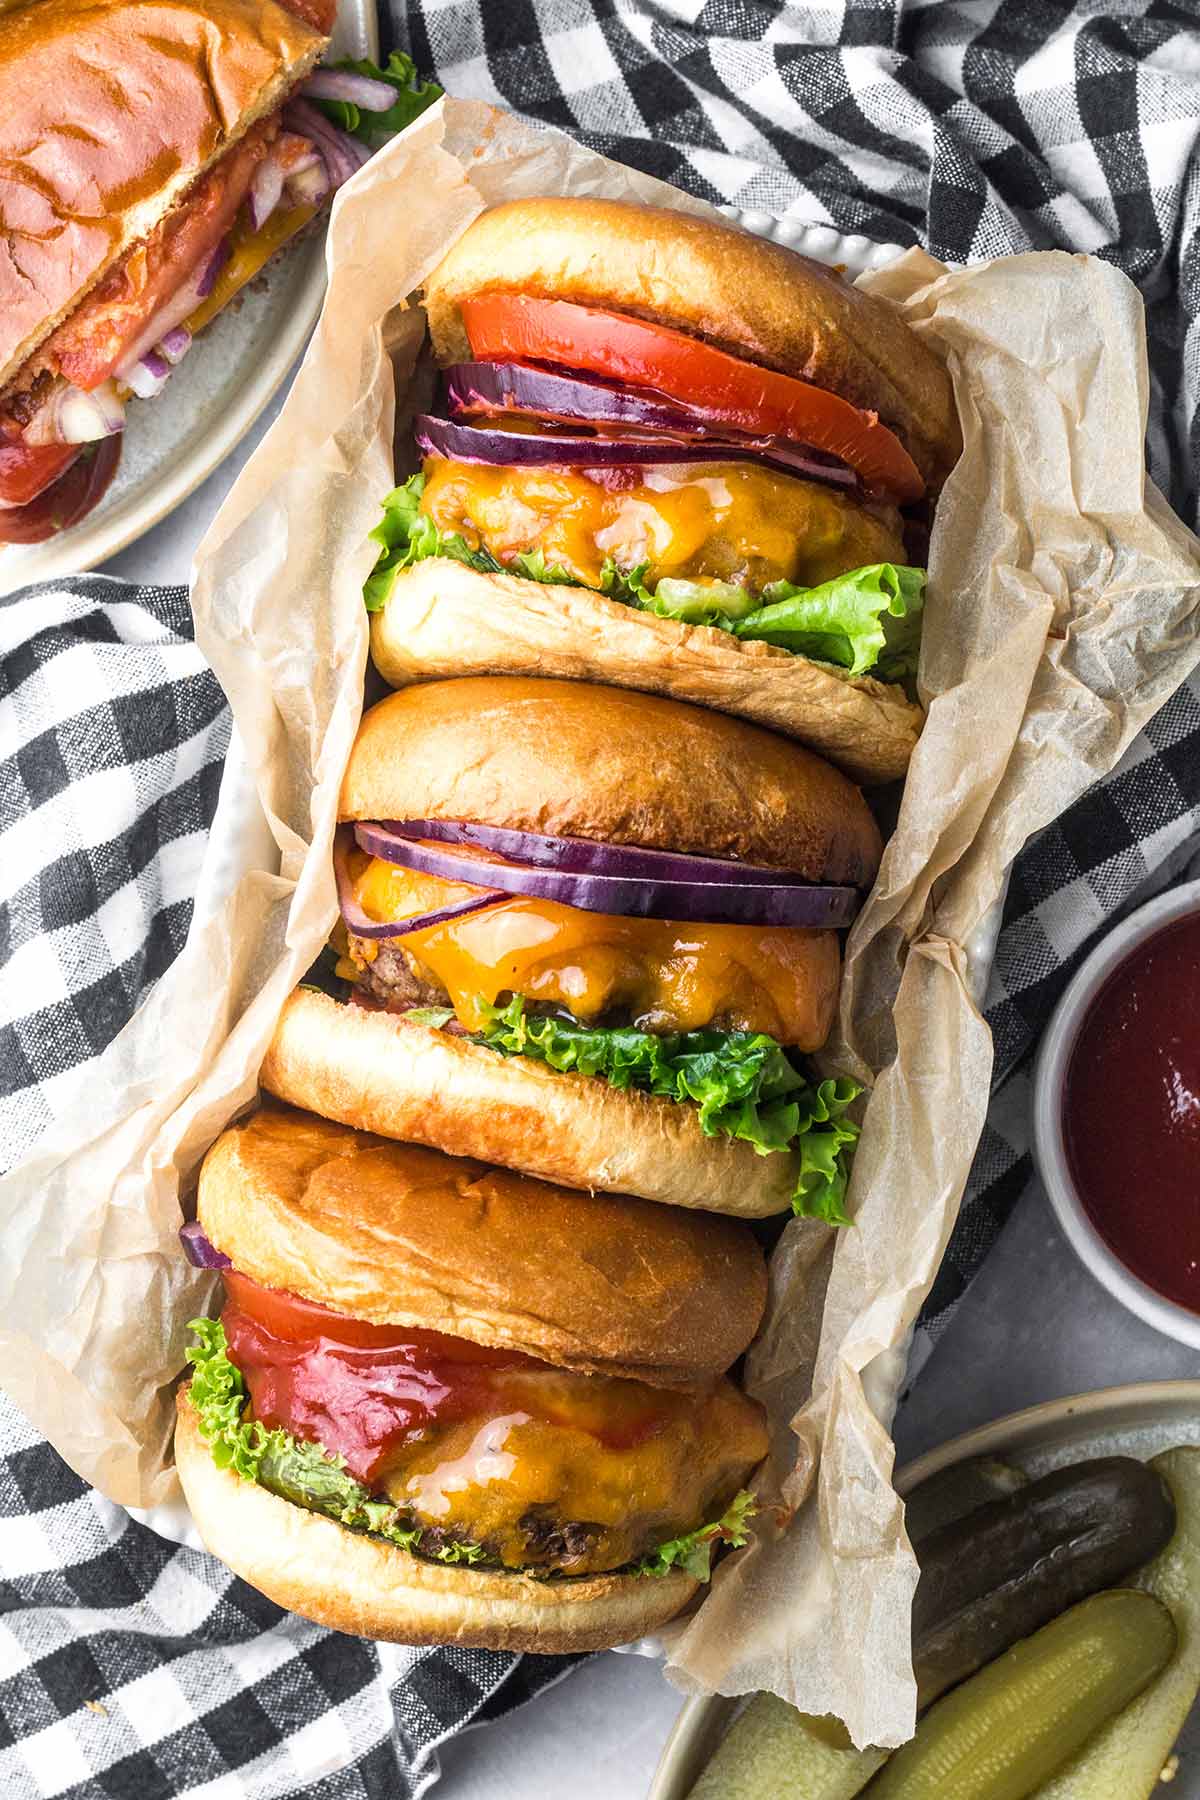 three cheeseburgers with lettuce, tomato, and onions.